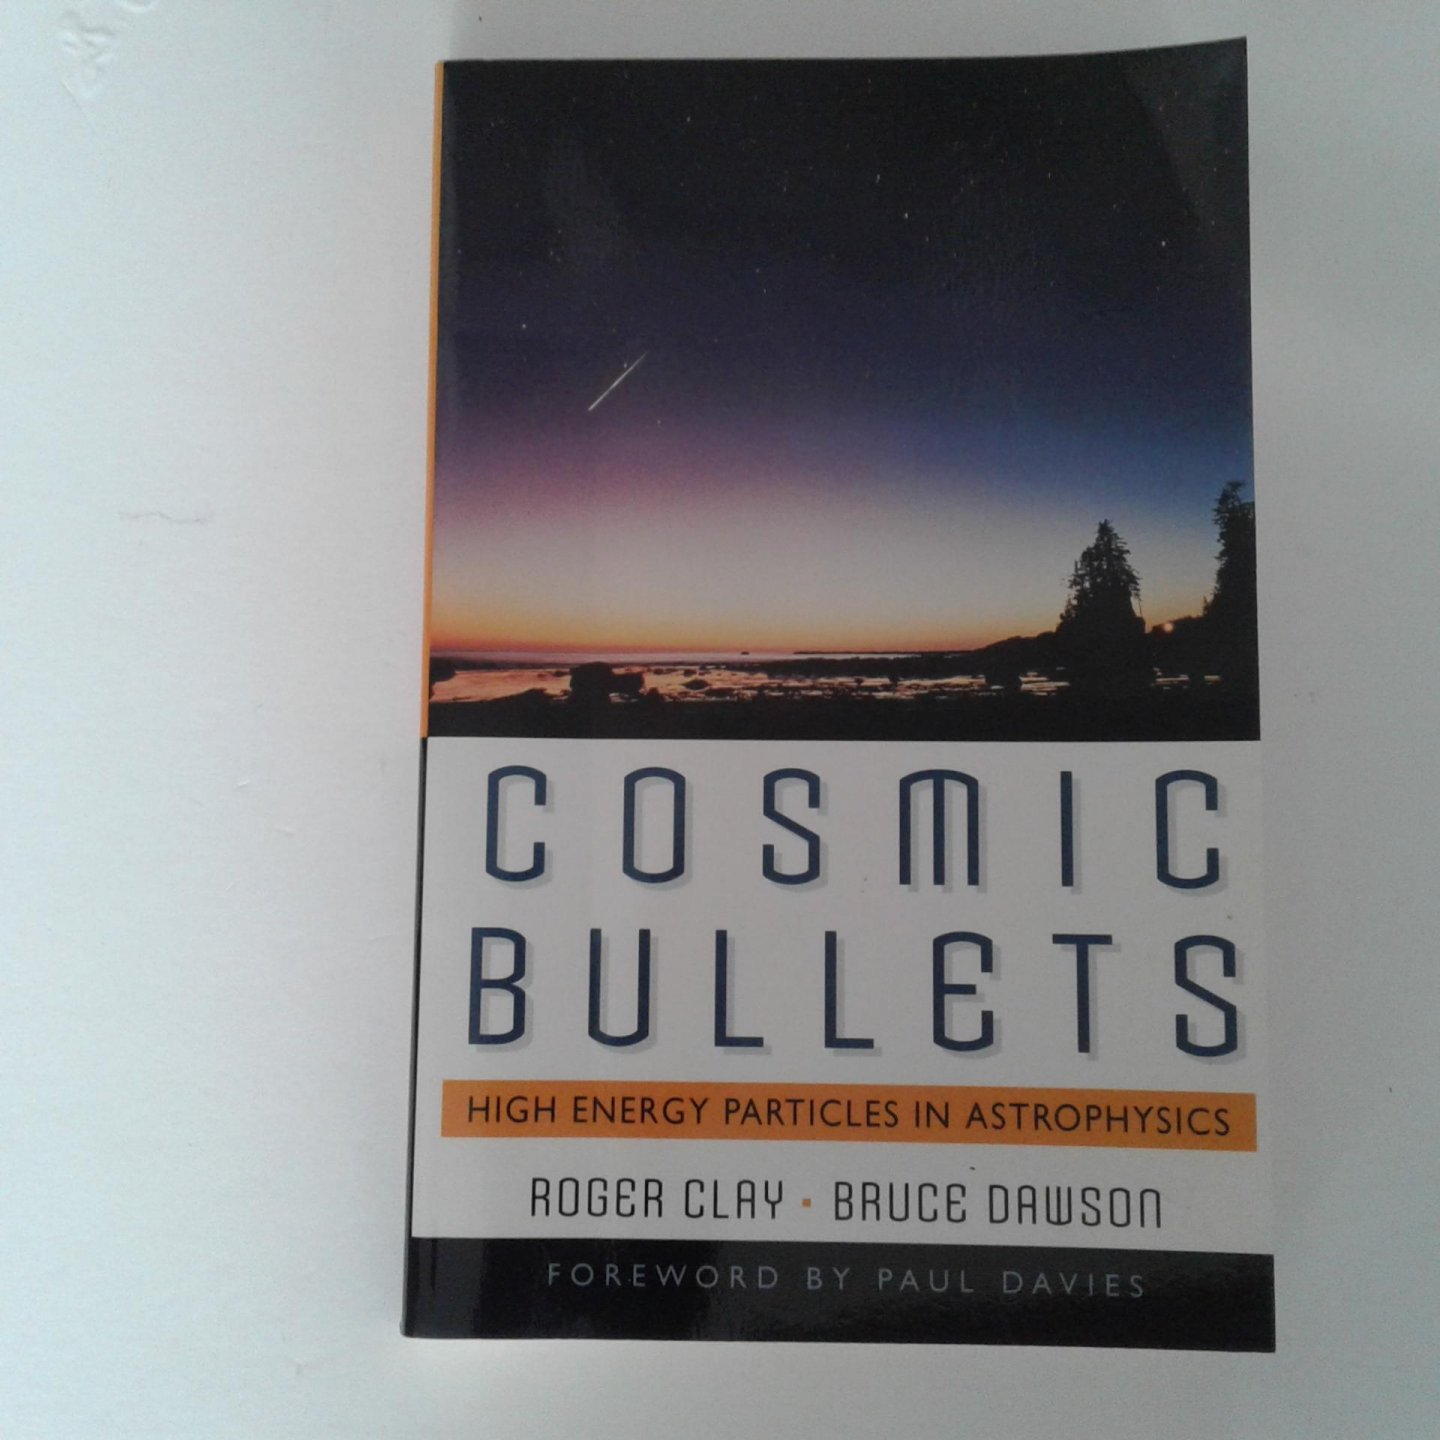 Clay, Roger ; Bruce Dawson - Cosmic Bullets ; High Energy Particles in Astrophysics